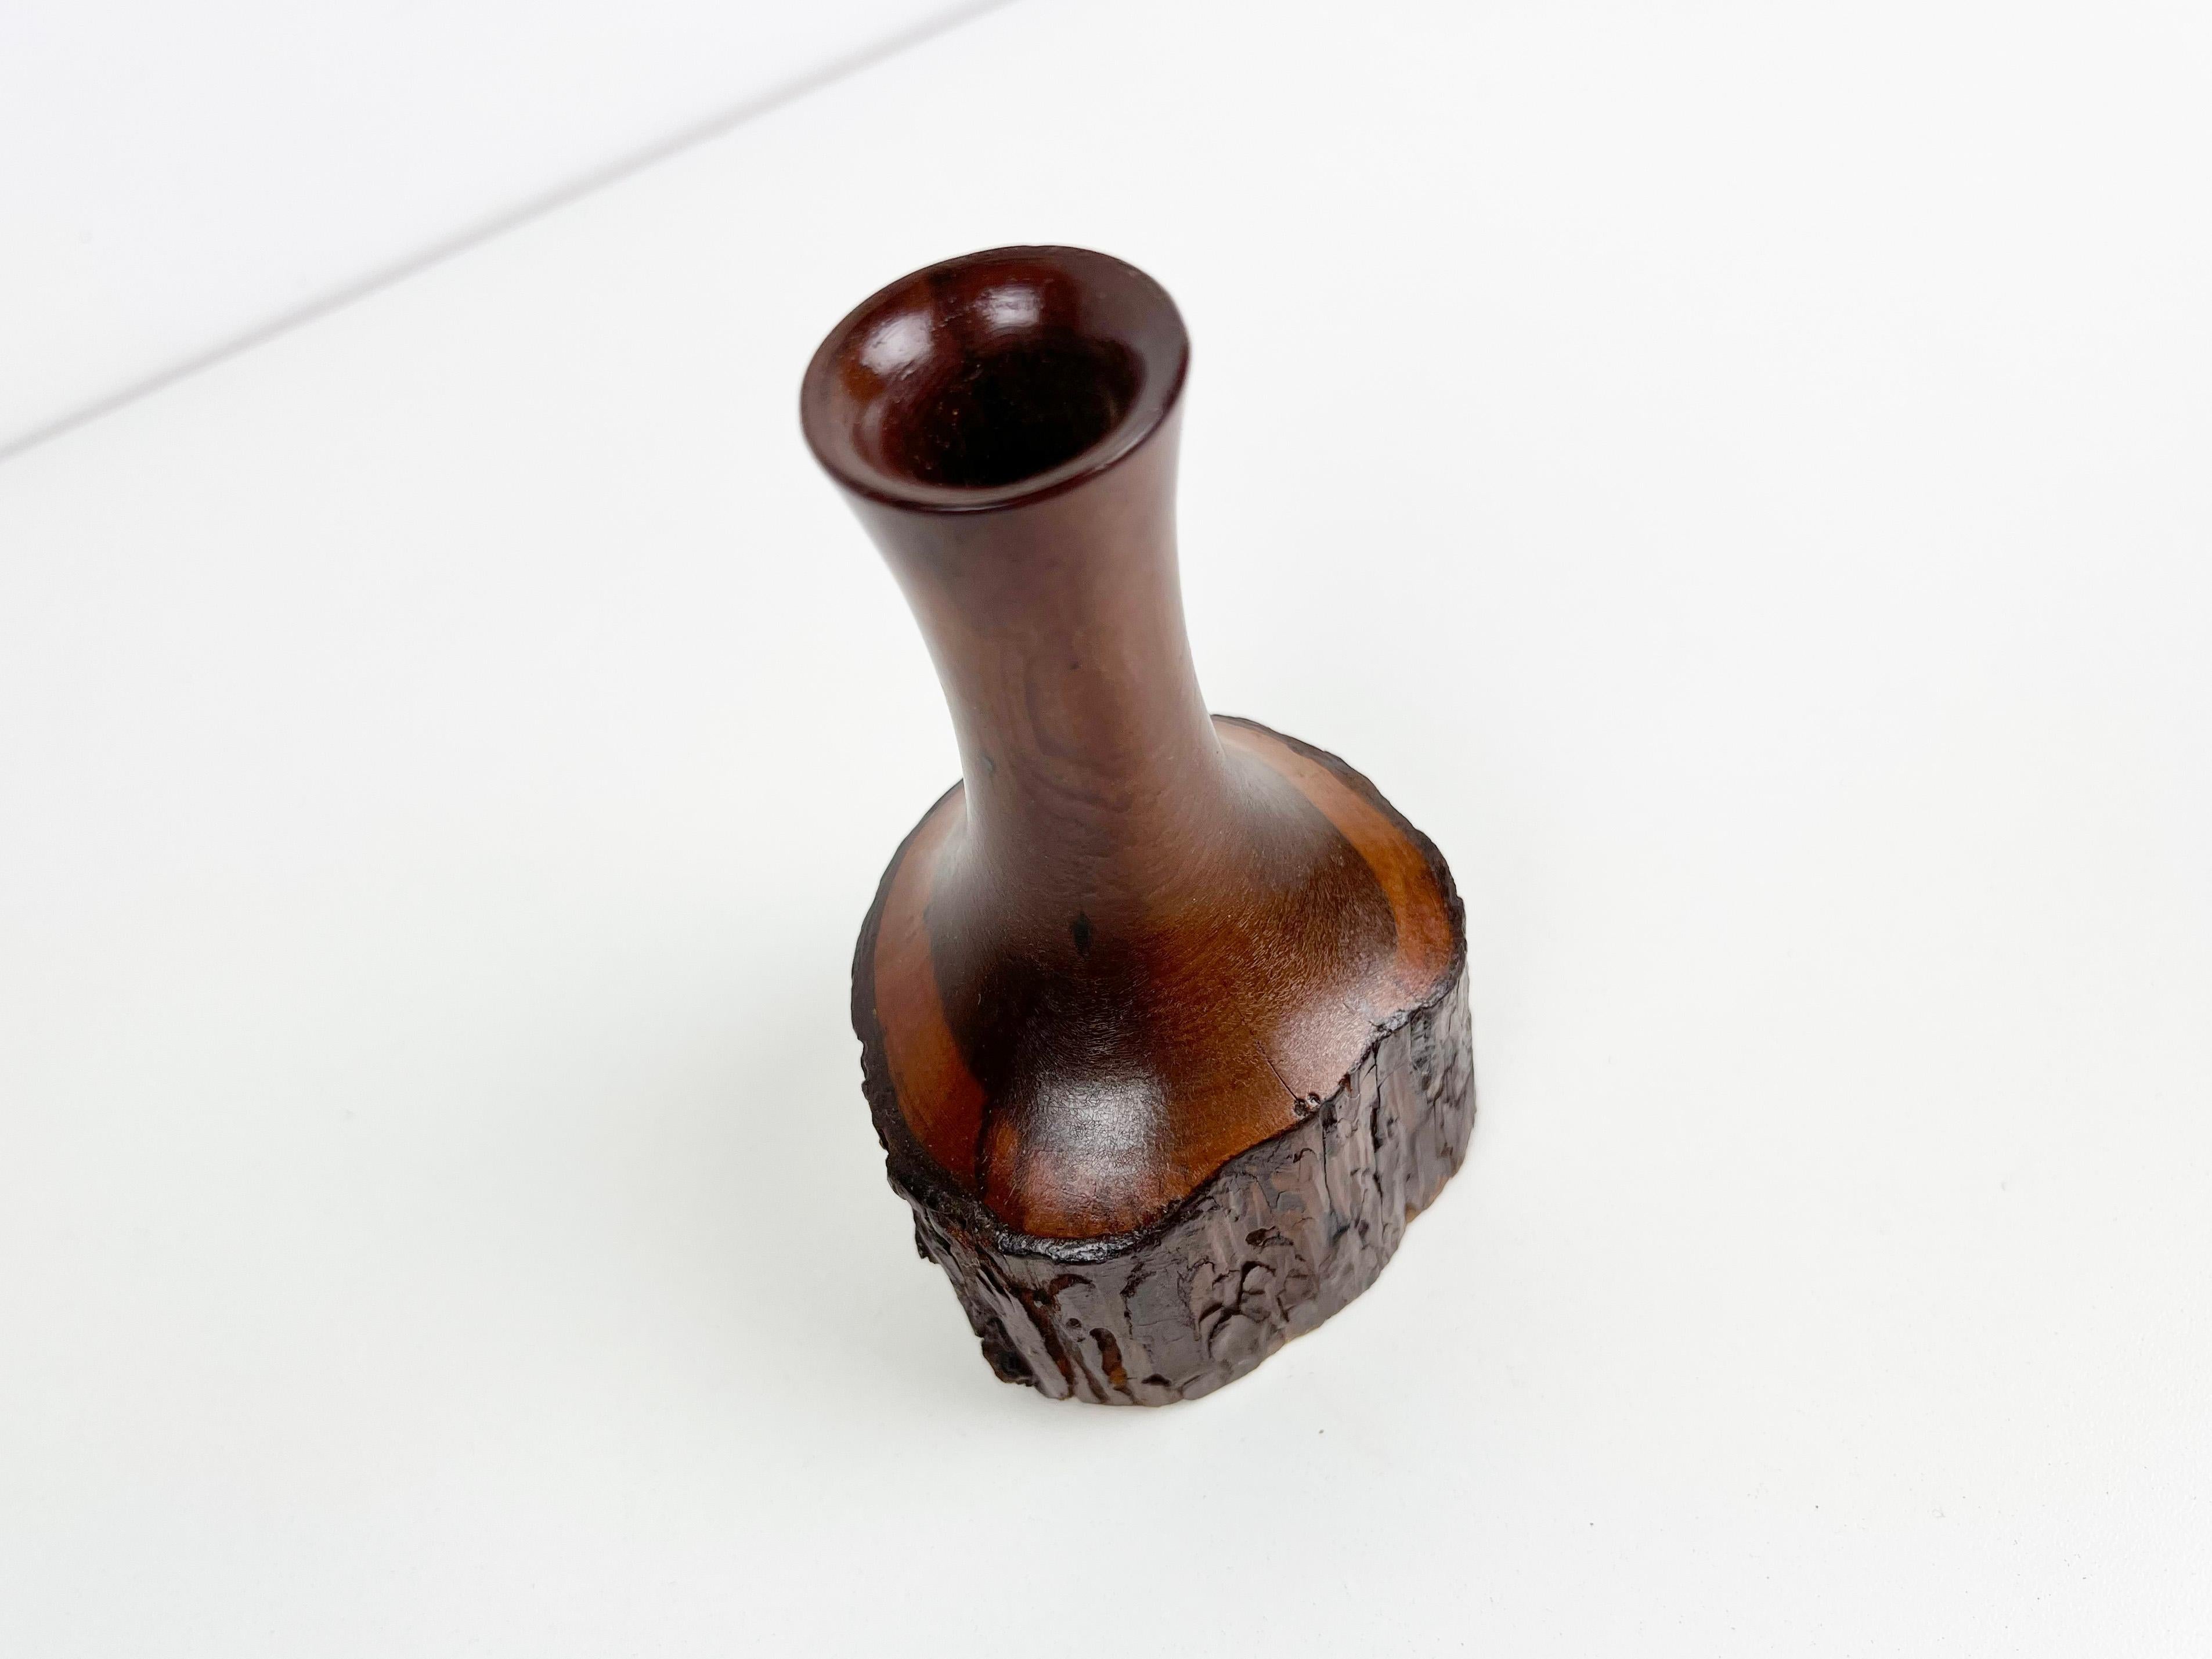 Vintage hand turned lived-edge bud vase crafted from solid wood. Signed on base.

Origin: USA

Year: 1960s

Style: Mid Century Modern / Studio

Dimensions: 2.8